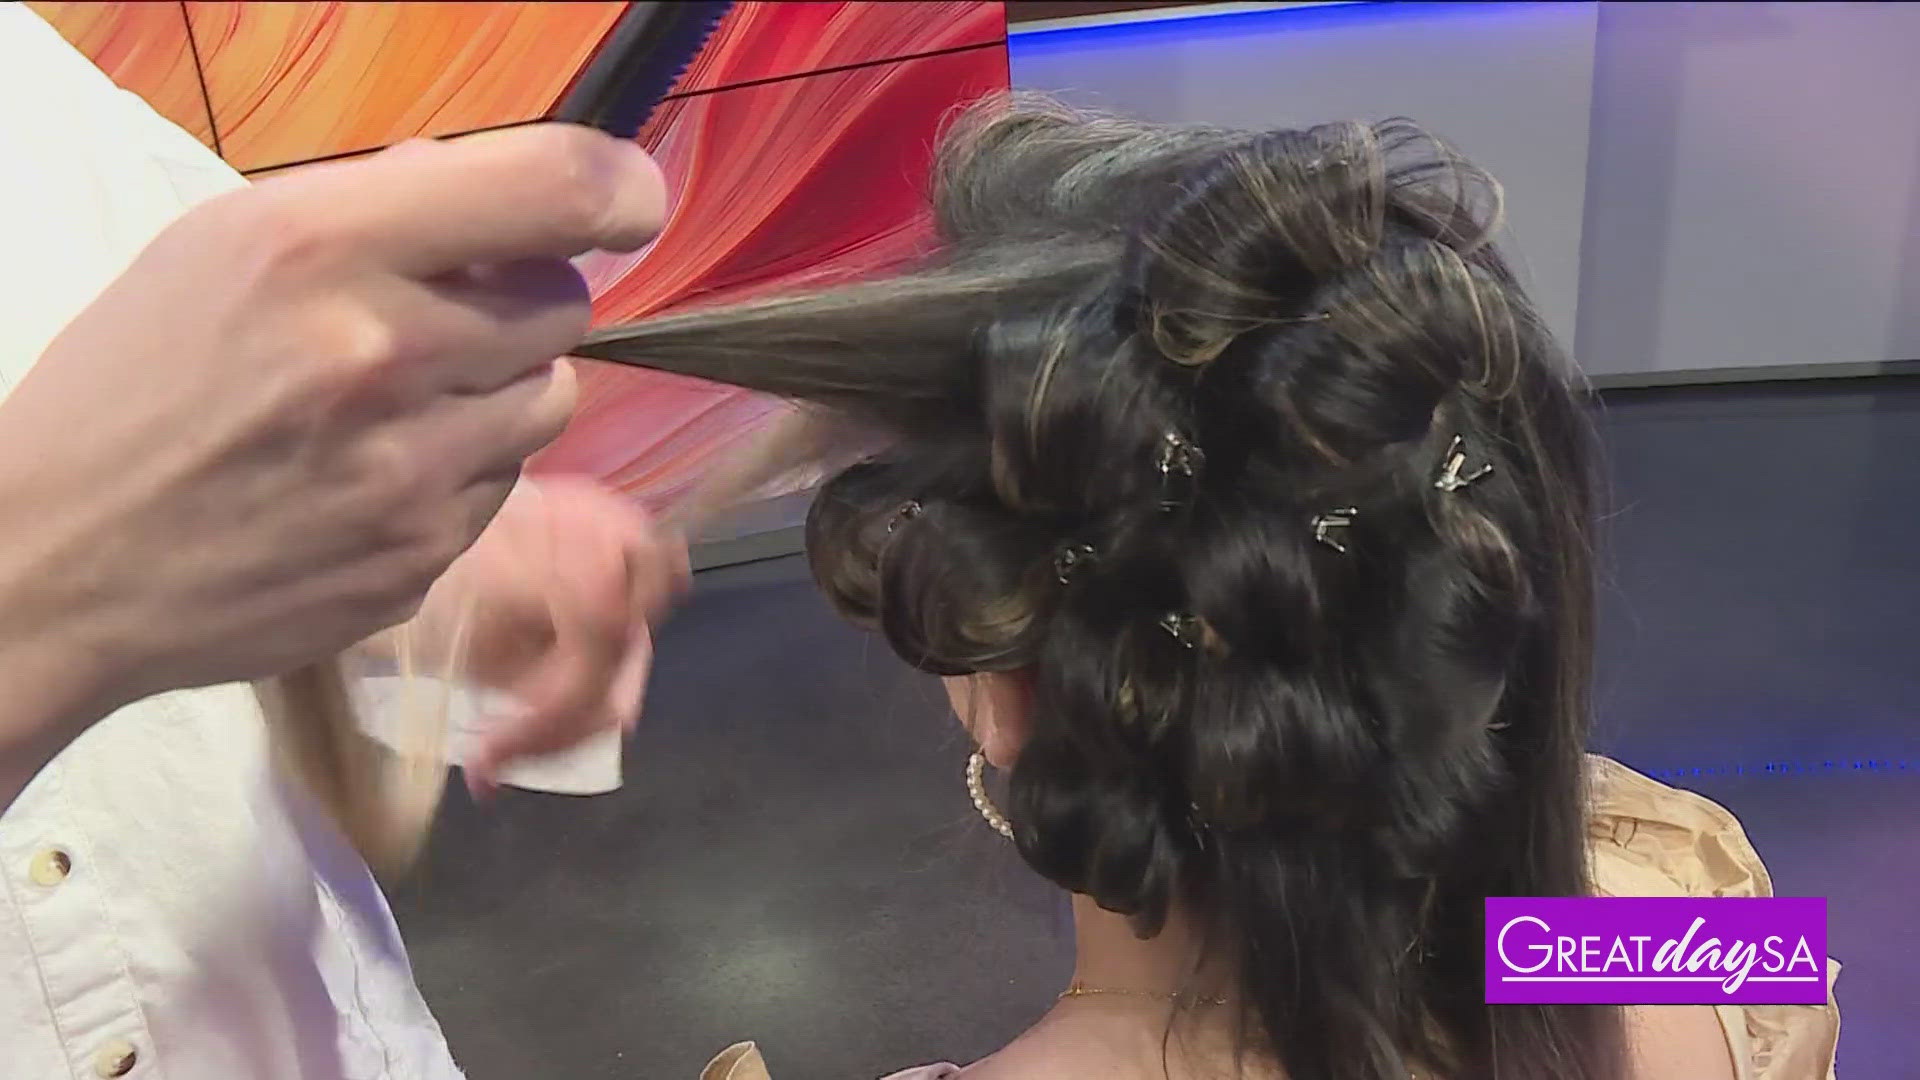 GDSA Hairstylist Juan Torres shares some hair advice for Mother's Day.